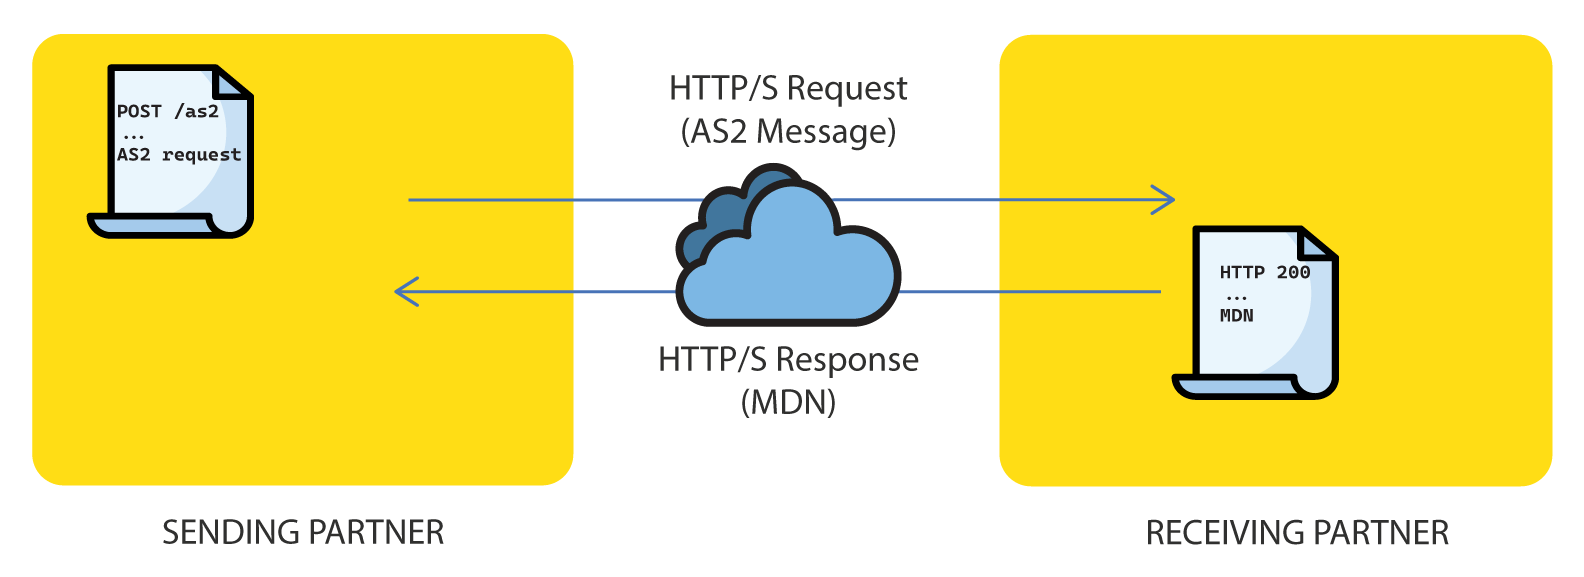 Synchronous MDN as the HTTP response